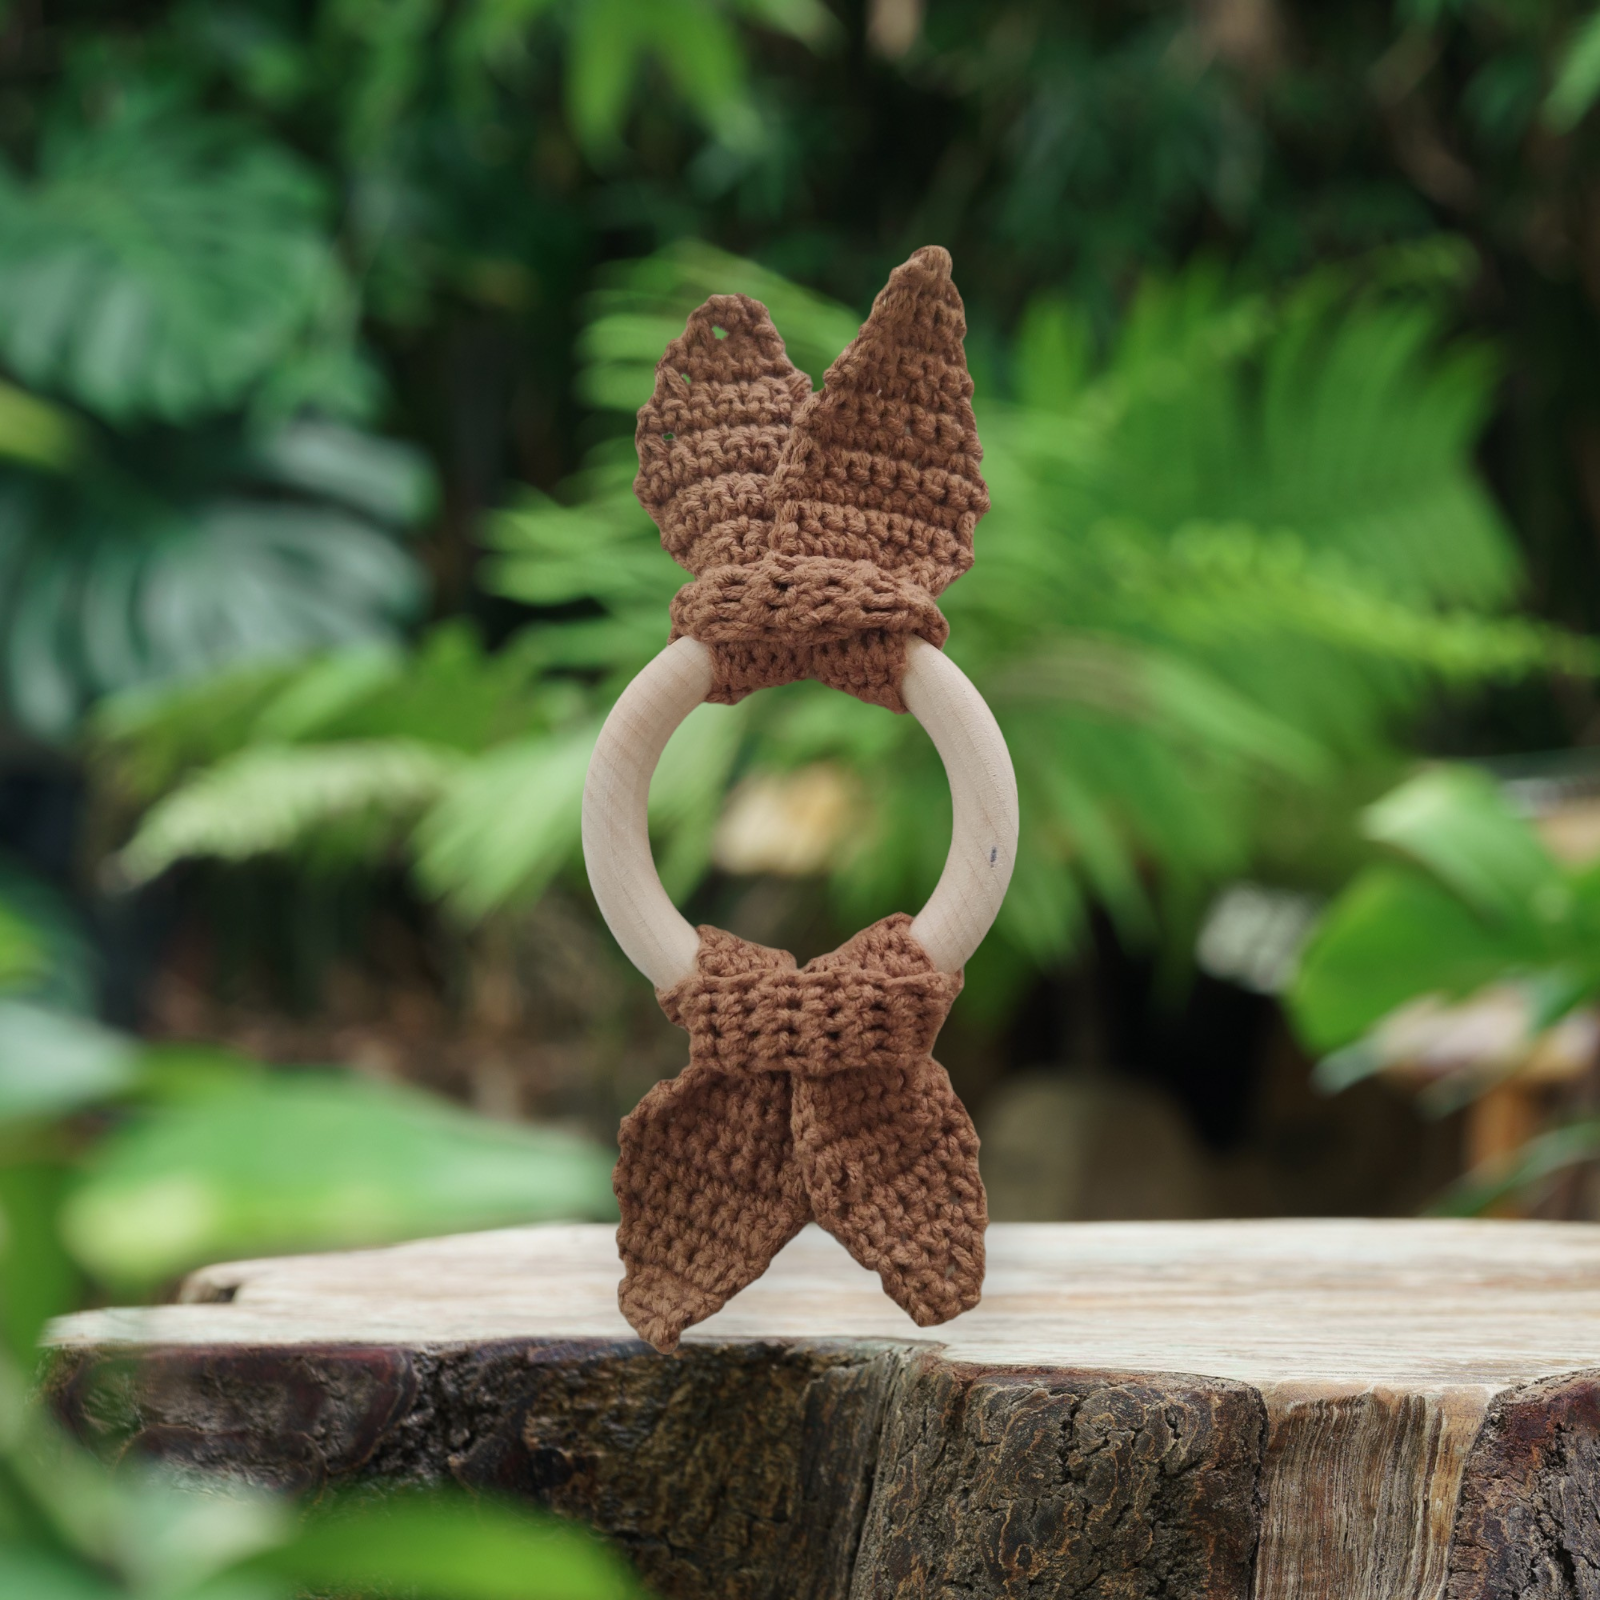 "Organic Crochet Wooden Teether: Eco-Friendly Baby Teething Toy for Natural Relief"